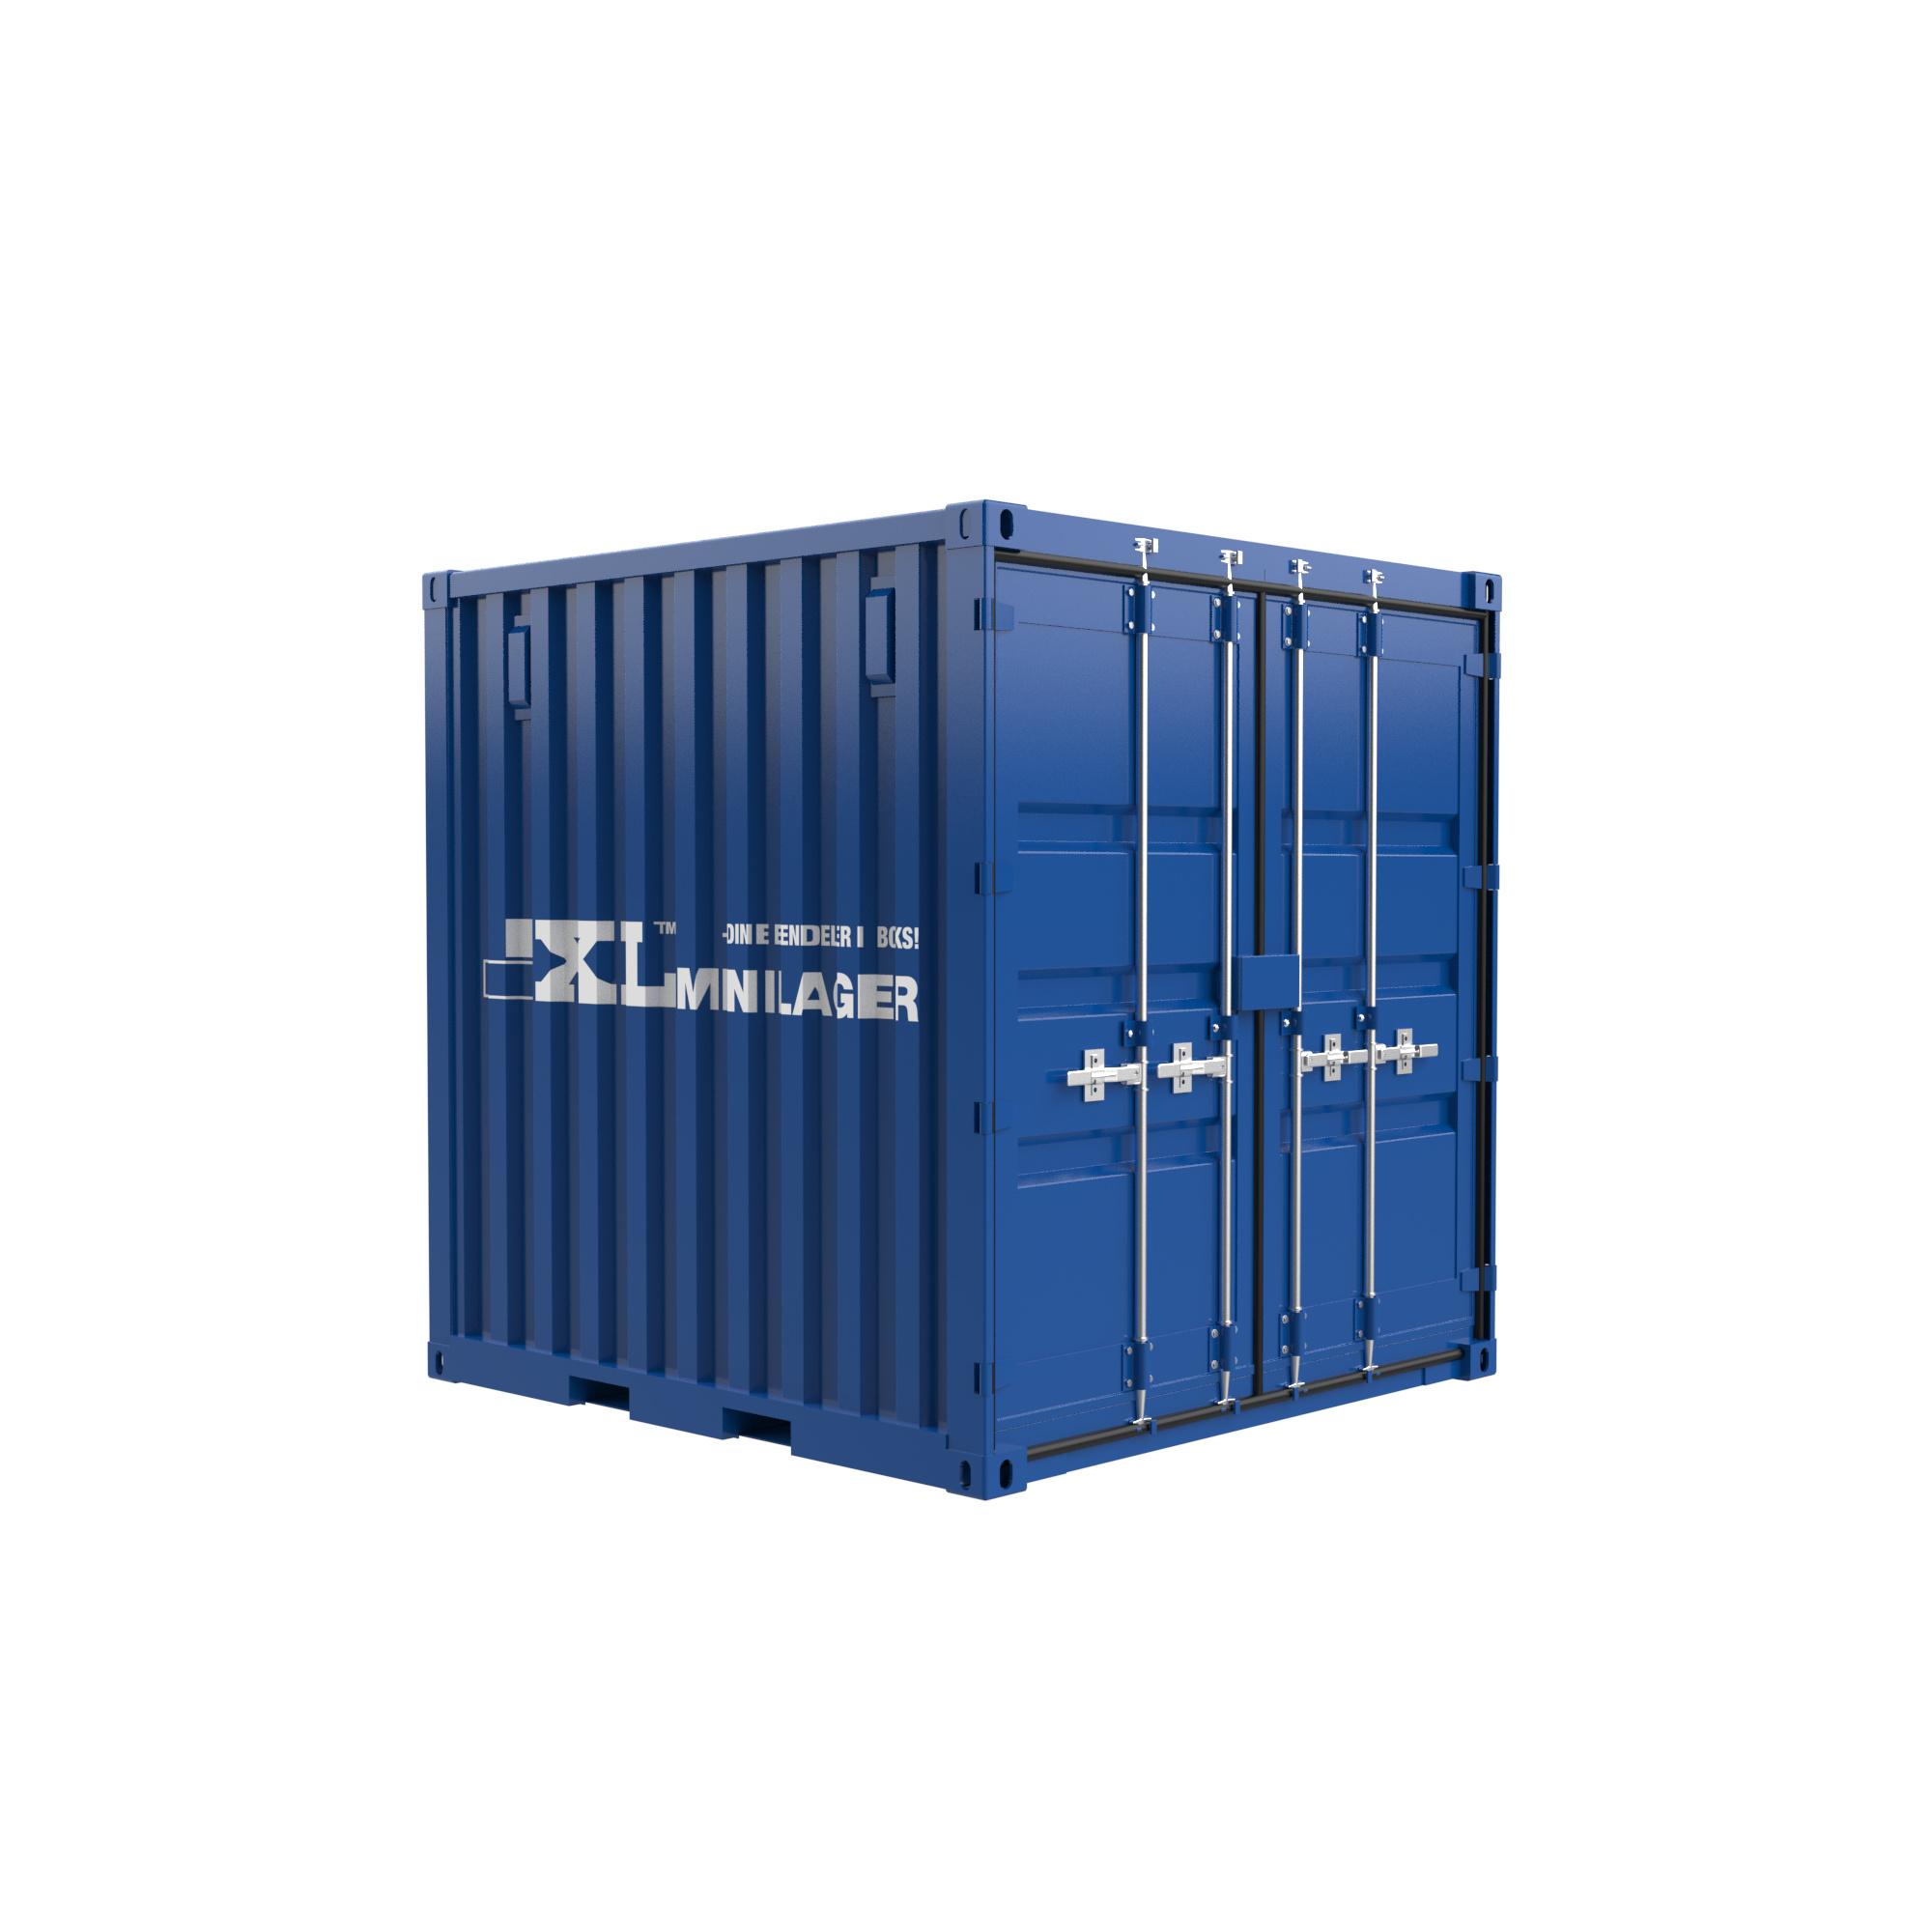 Small lagercontainer